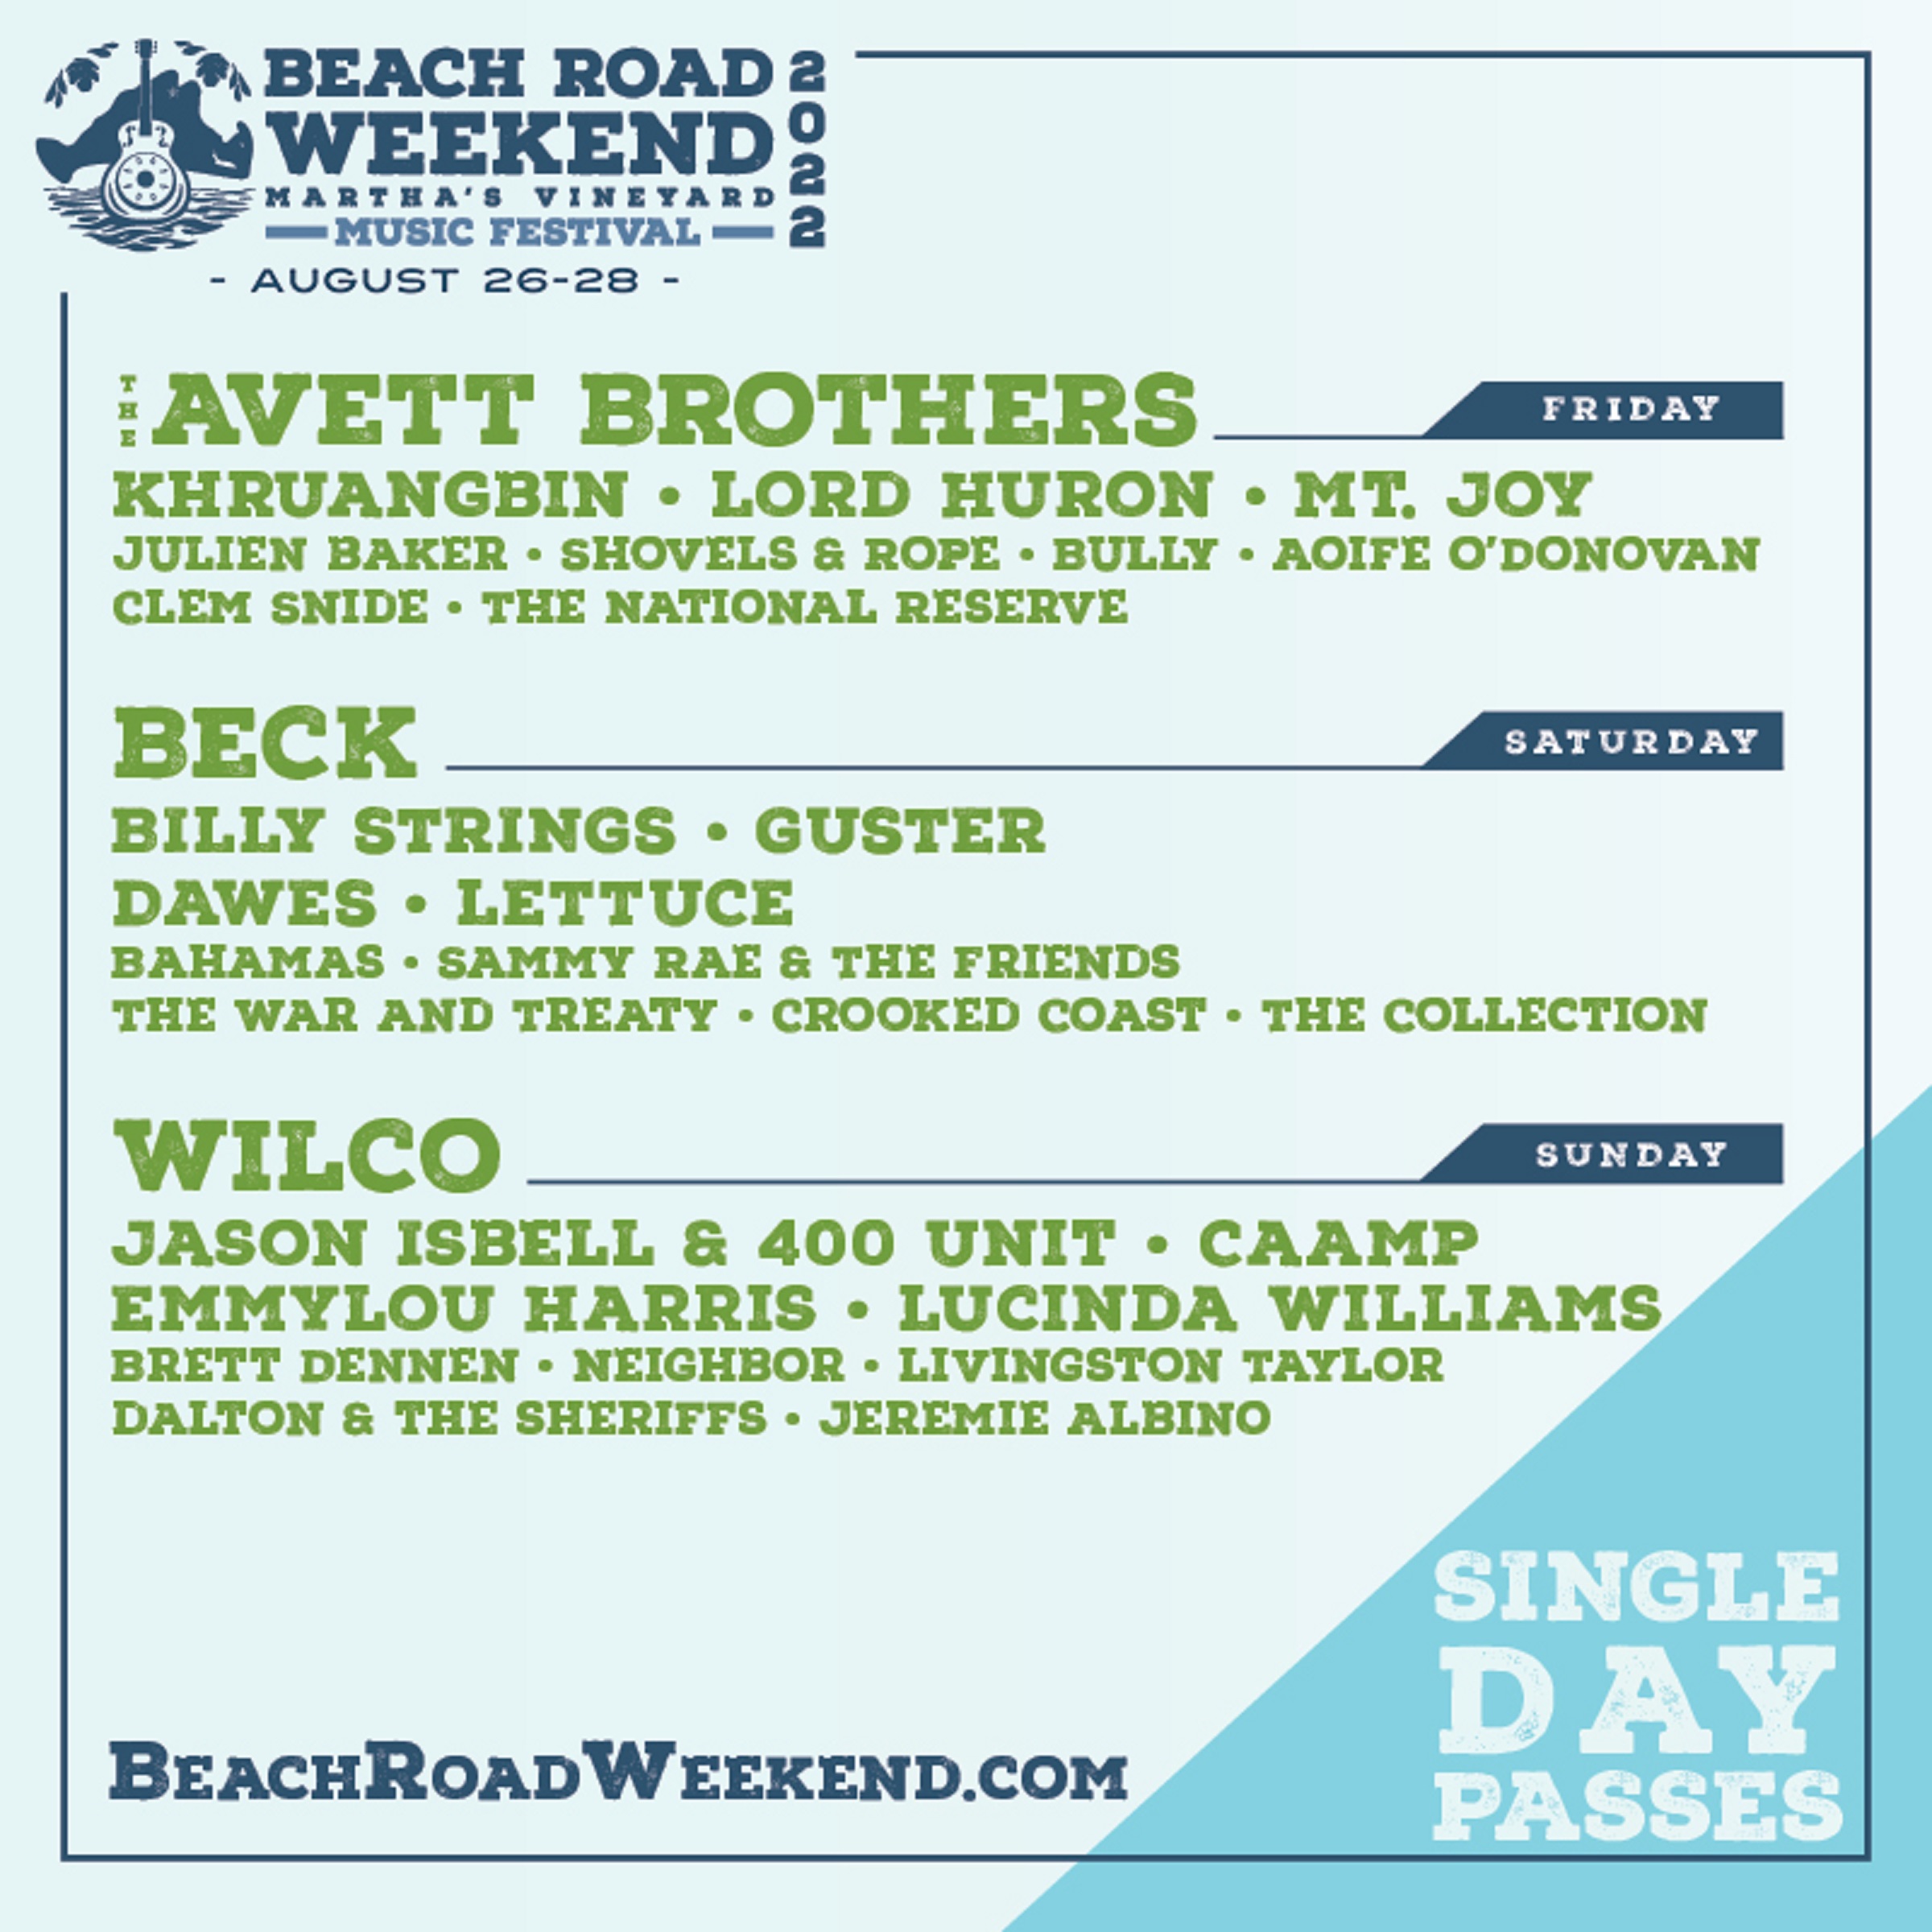 Friends of Martha’s Vineyard Concerts Announces Lineups for 2022 Beach Road Weekend and MV Concert Series